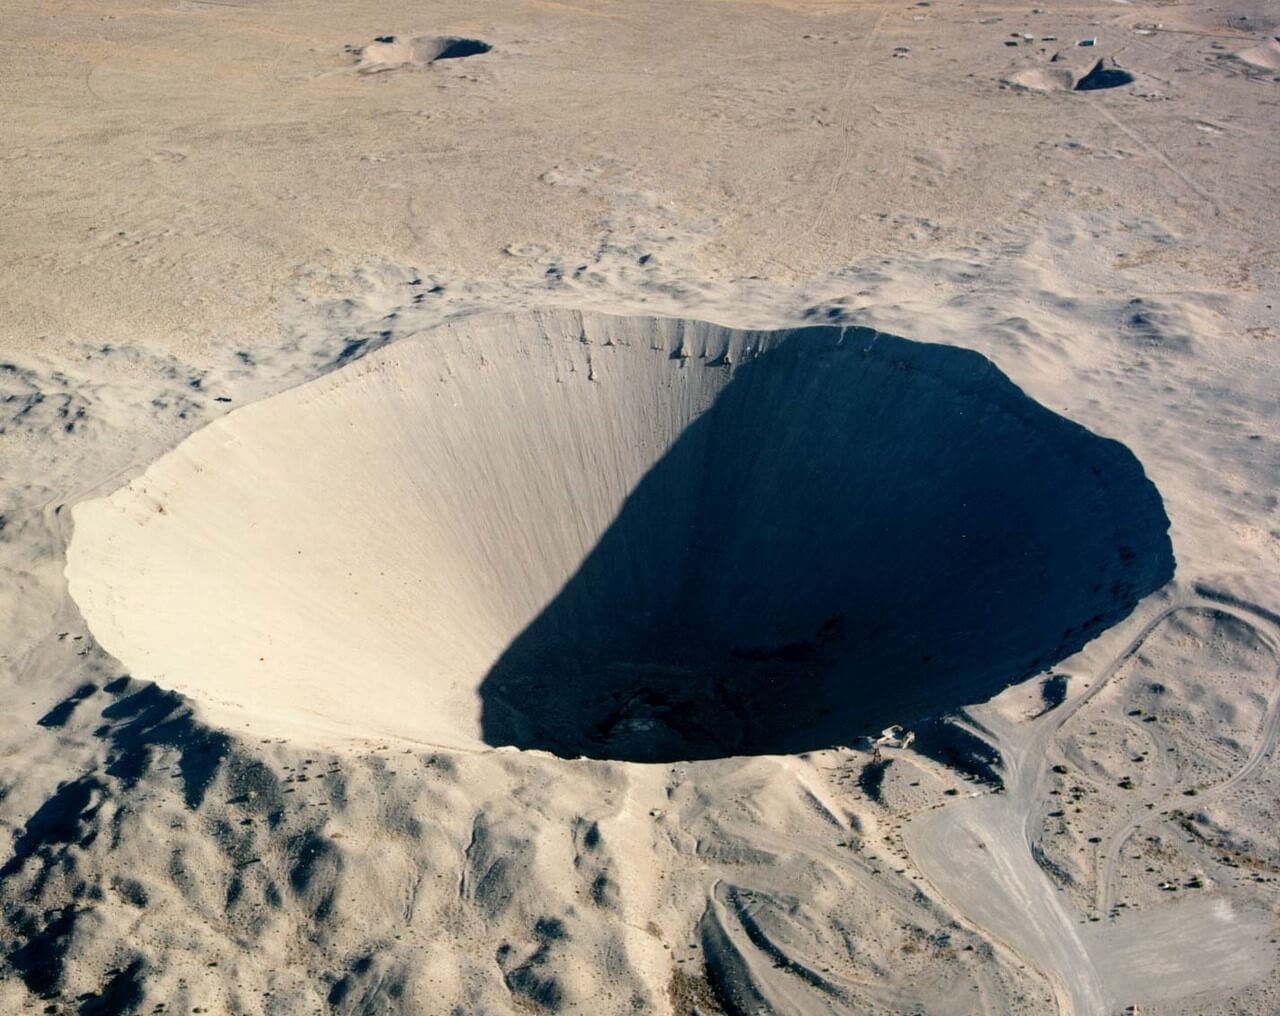 What is the large crater from a nuclear explosion